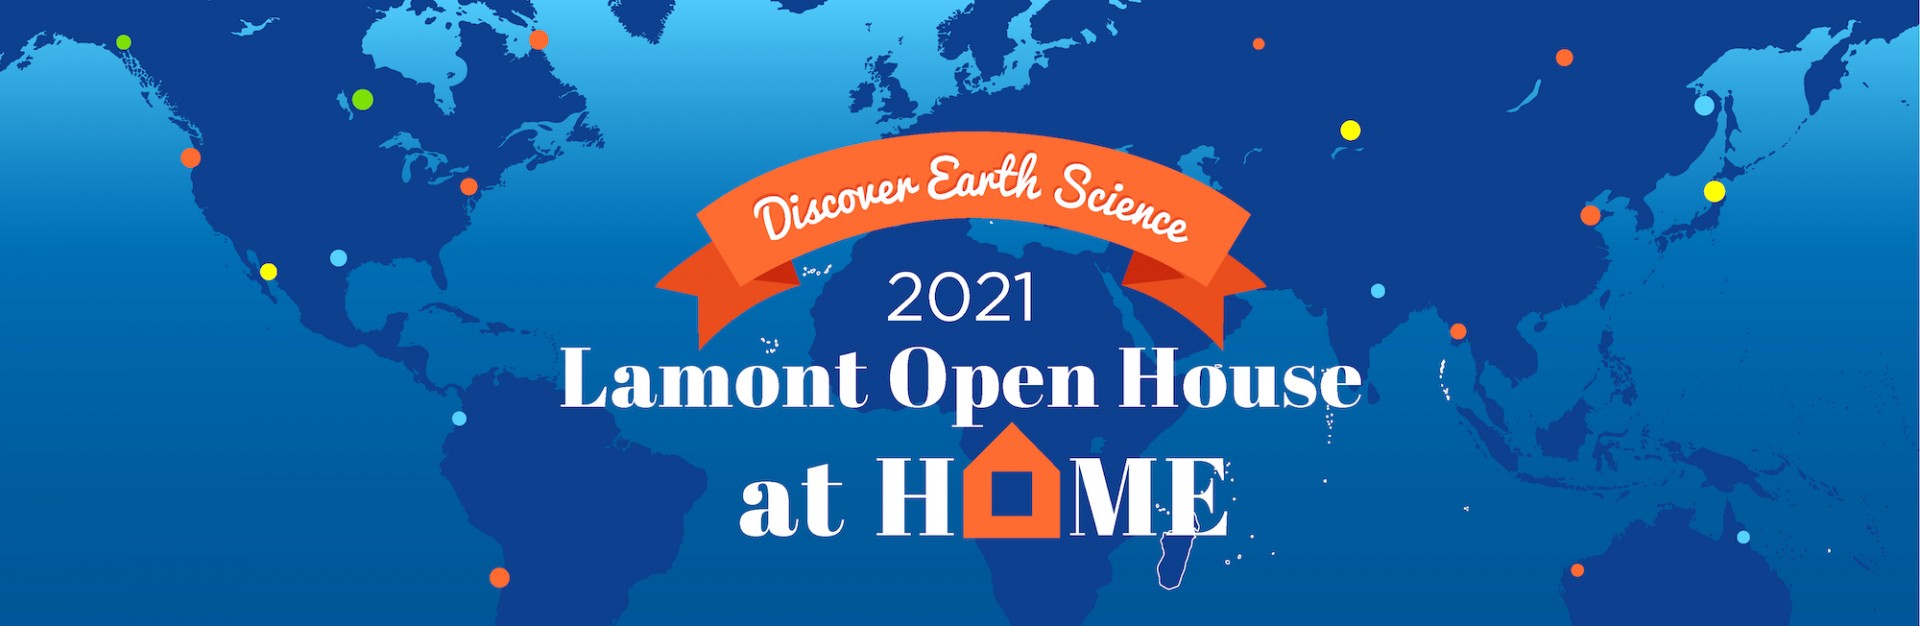 2021 Lamont Open House at Home text over blue world map